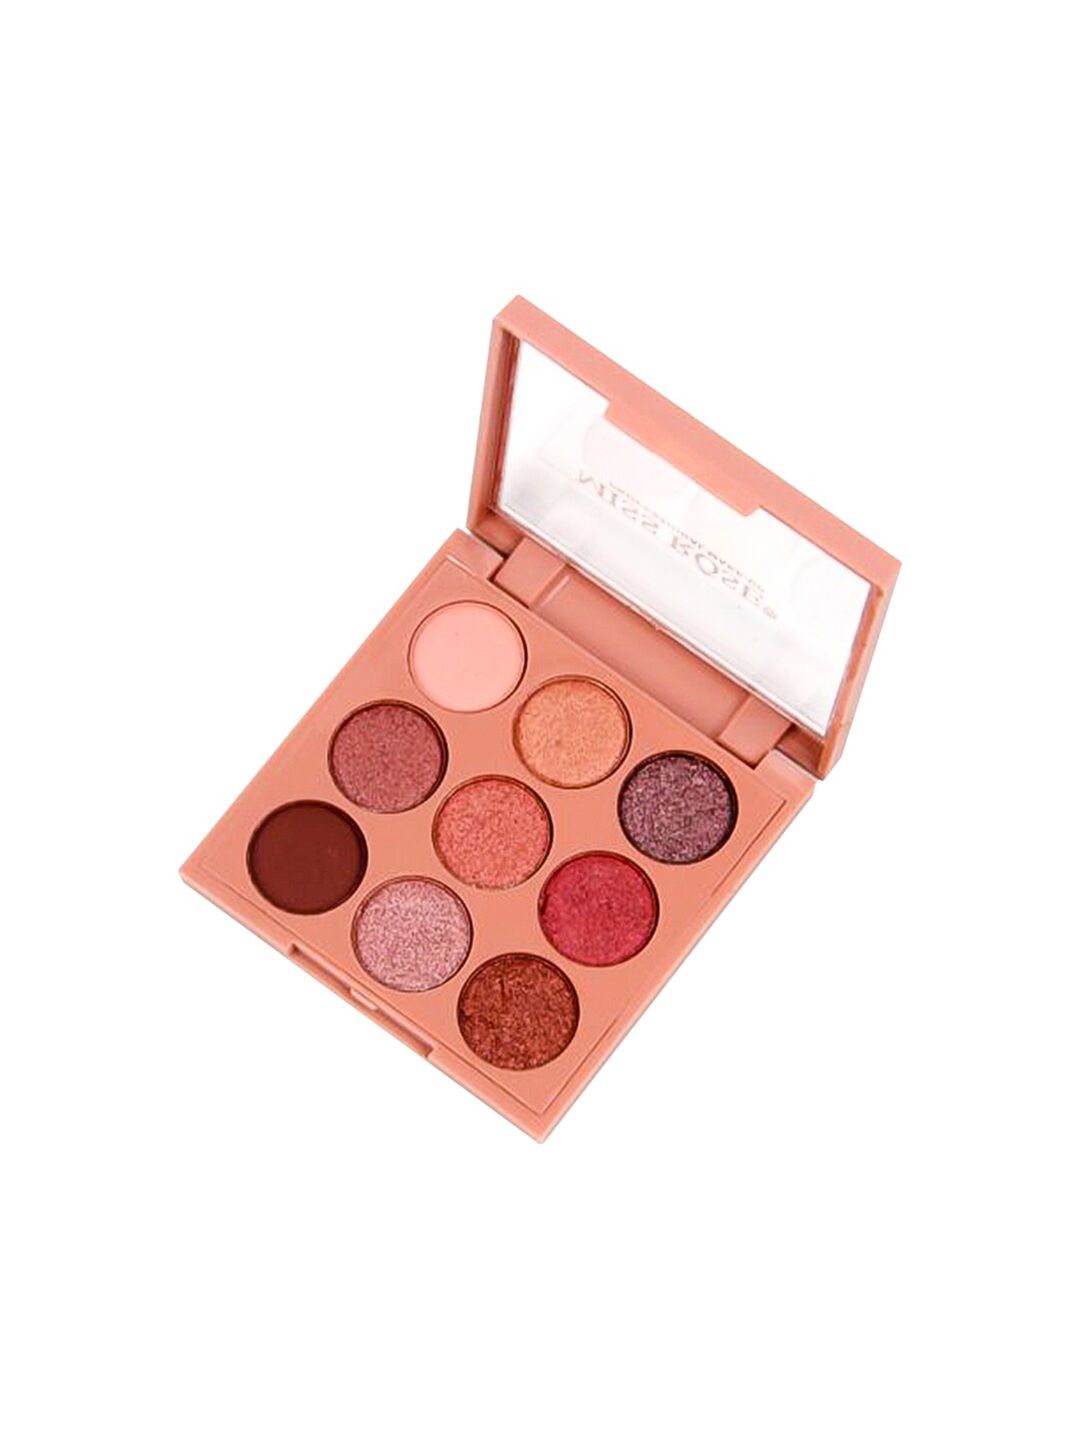 MISS ROSE Multicoloured 9 Color Matte Glitter Mini Eyeshadow Palette 7001-122N 04 7.5gm Price in India